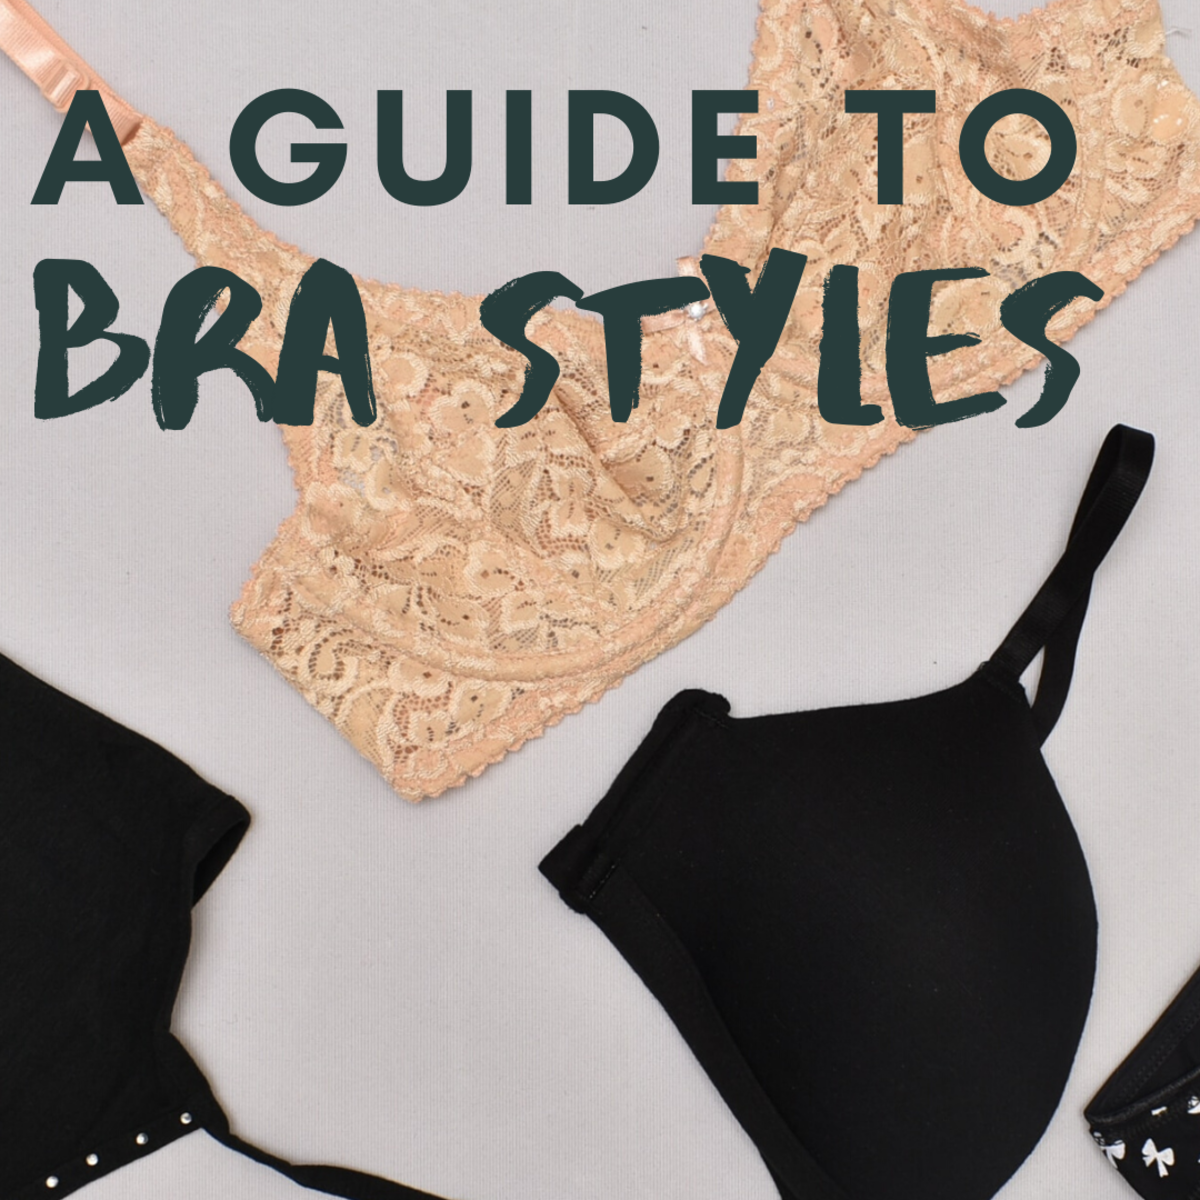 Lingeropedia: An Illustrated Guide to Bras (Brassieres)